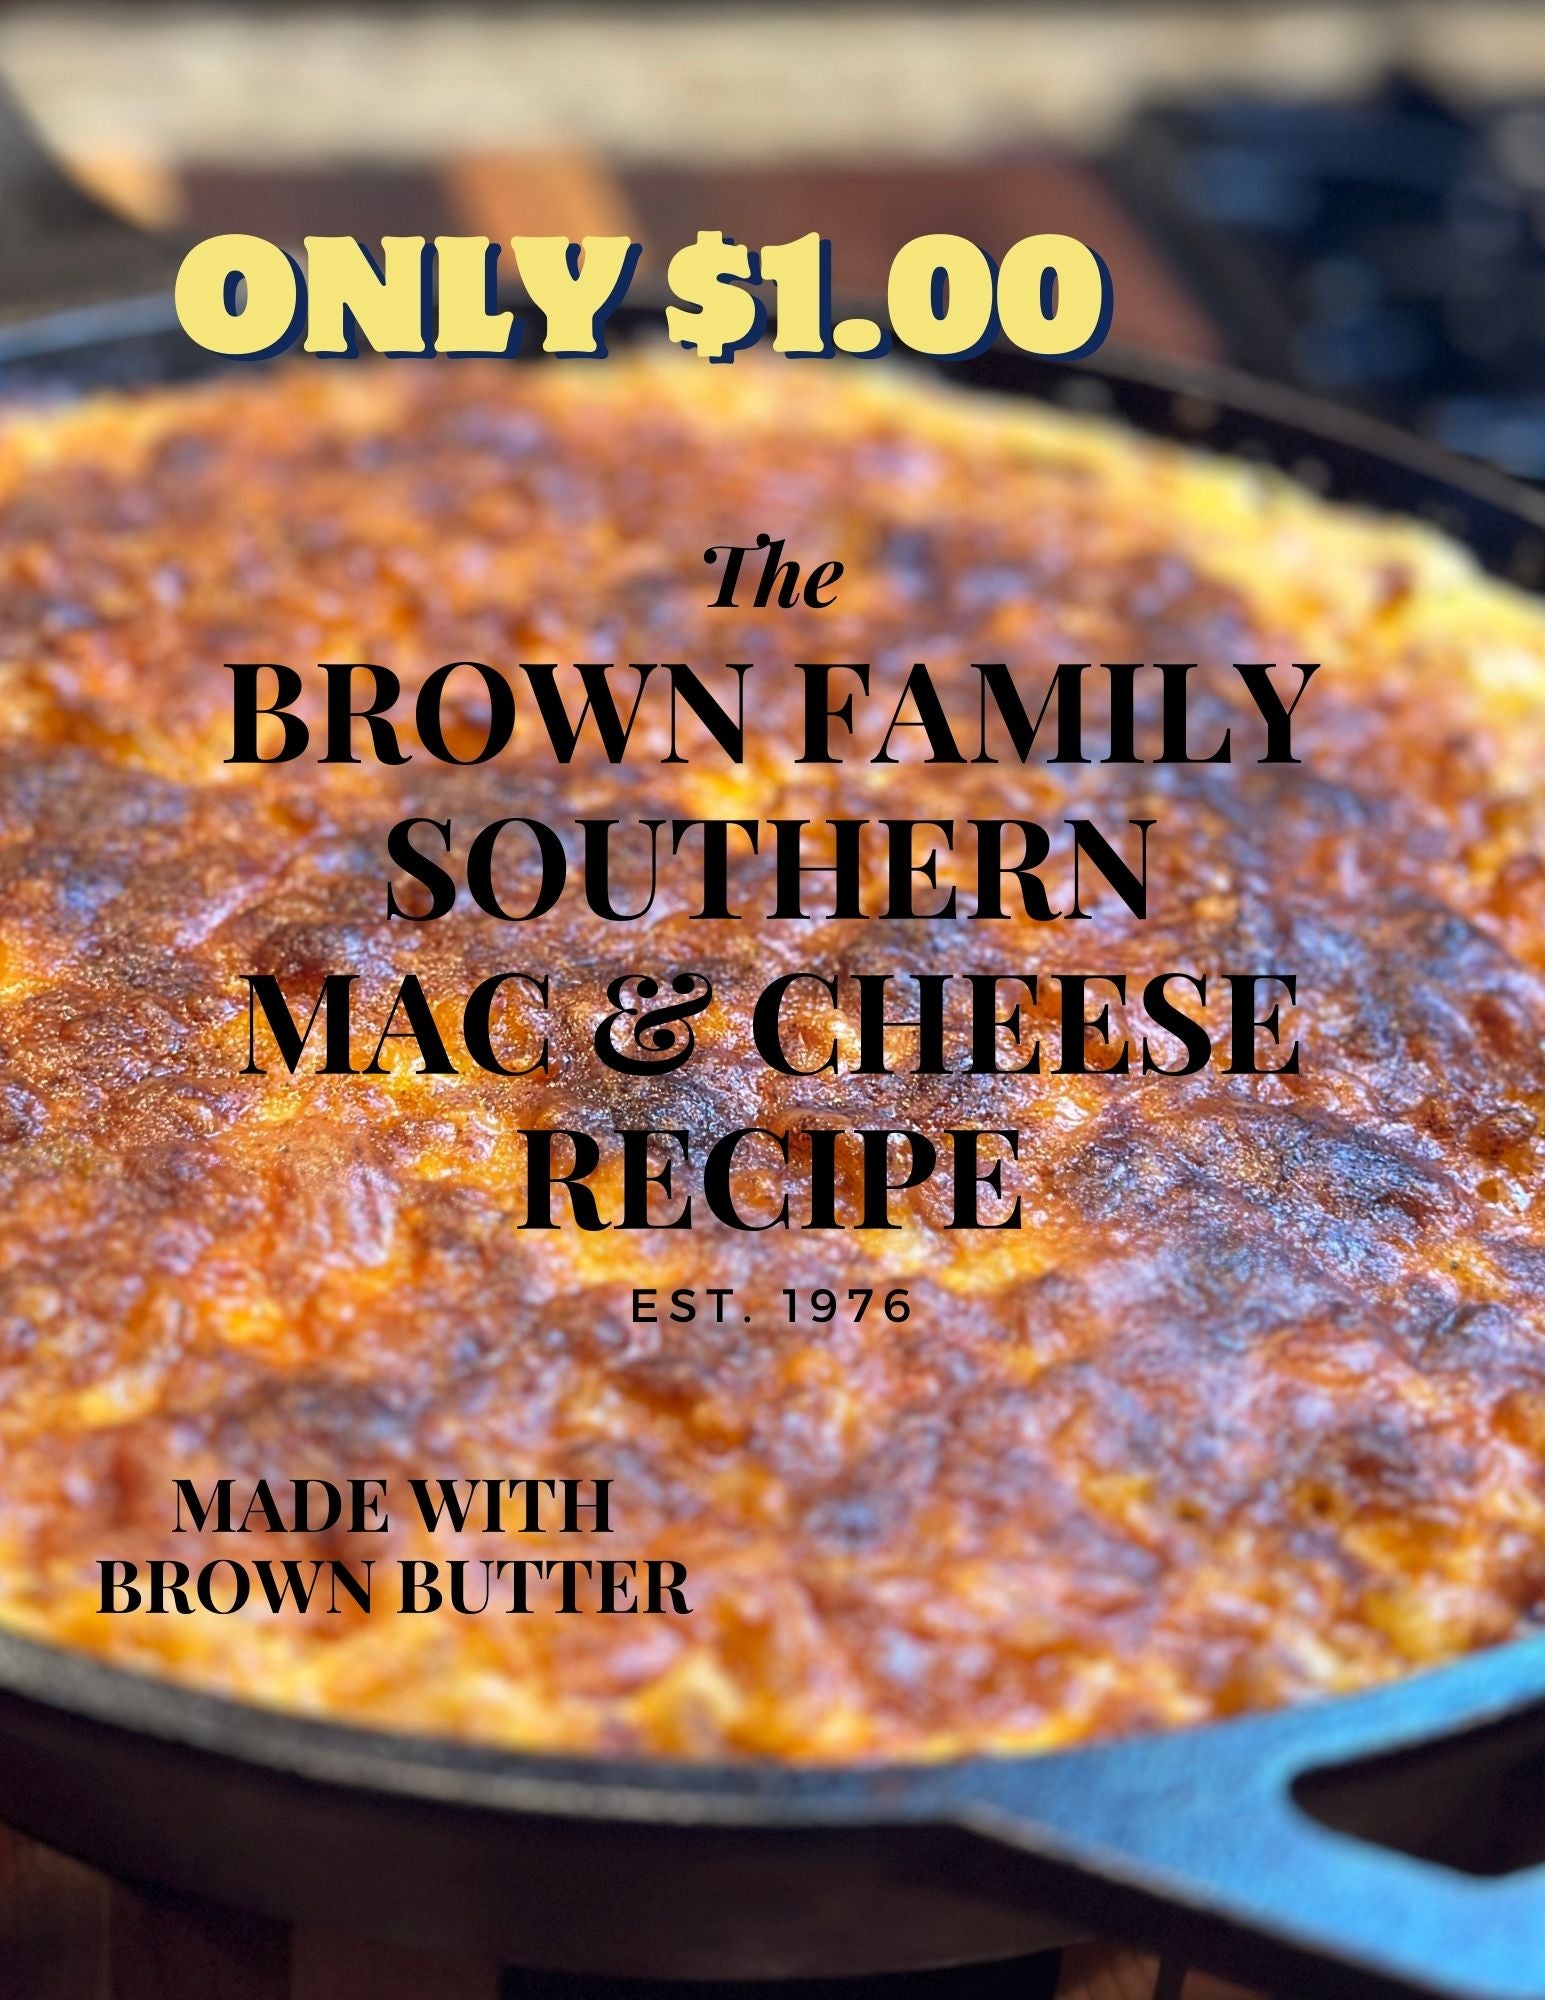 The Brown Family Southern Baked Macaroni & Cheese Recipe